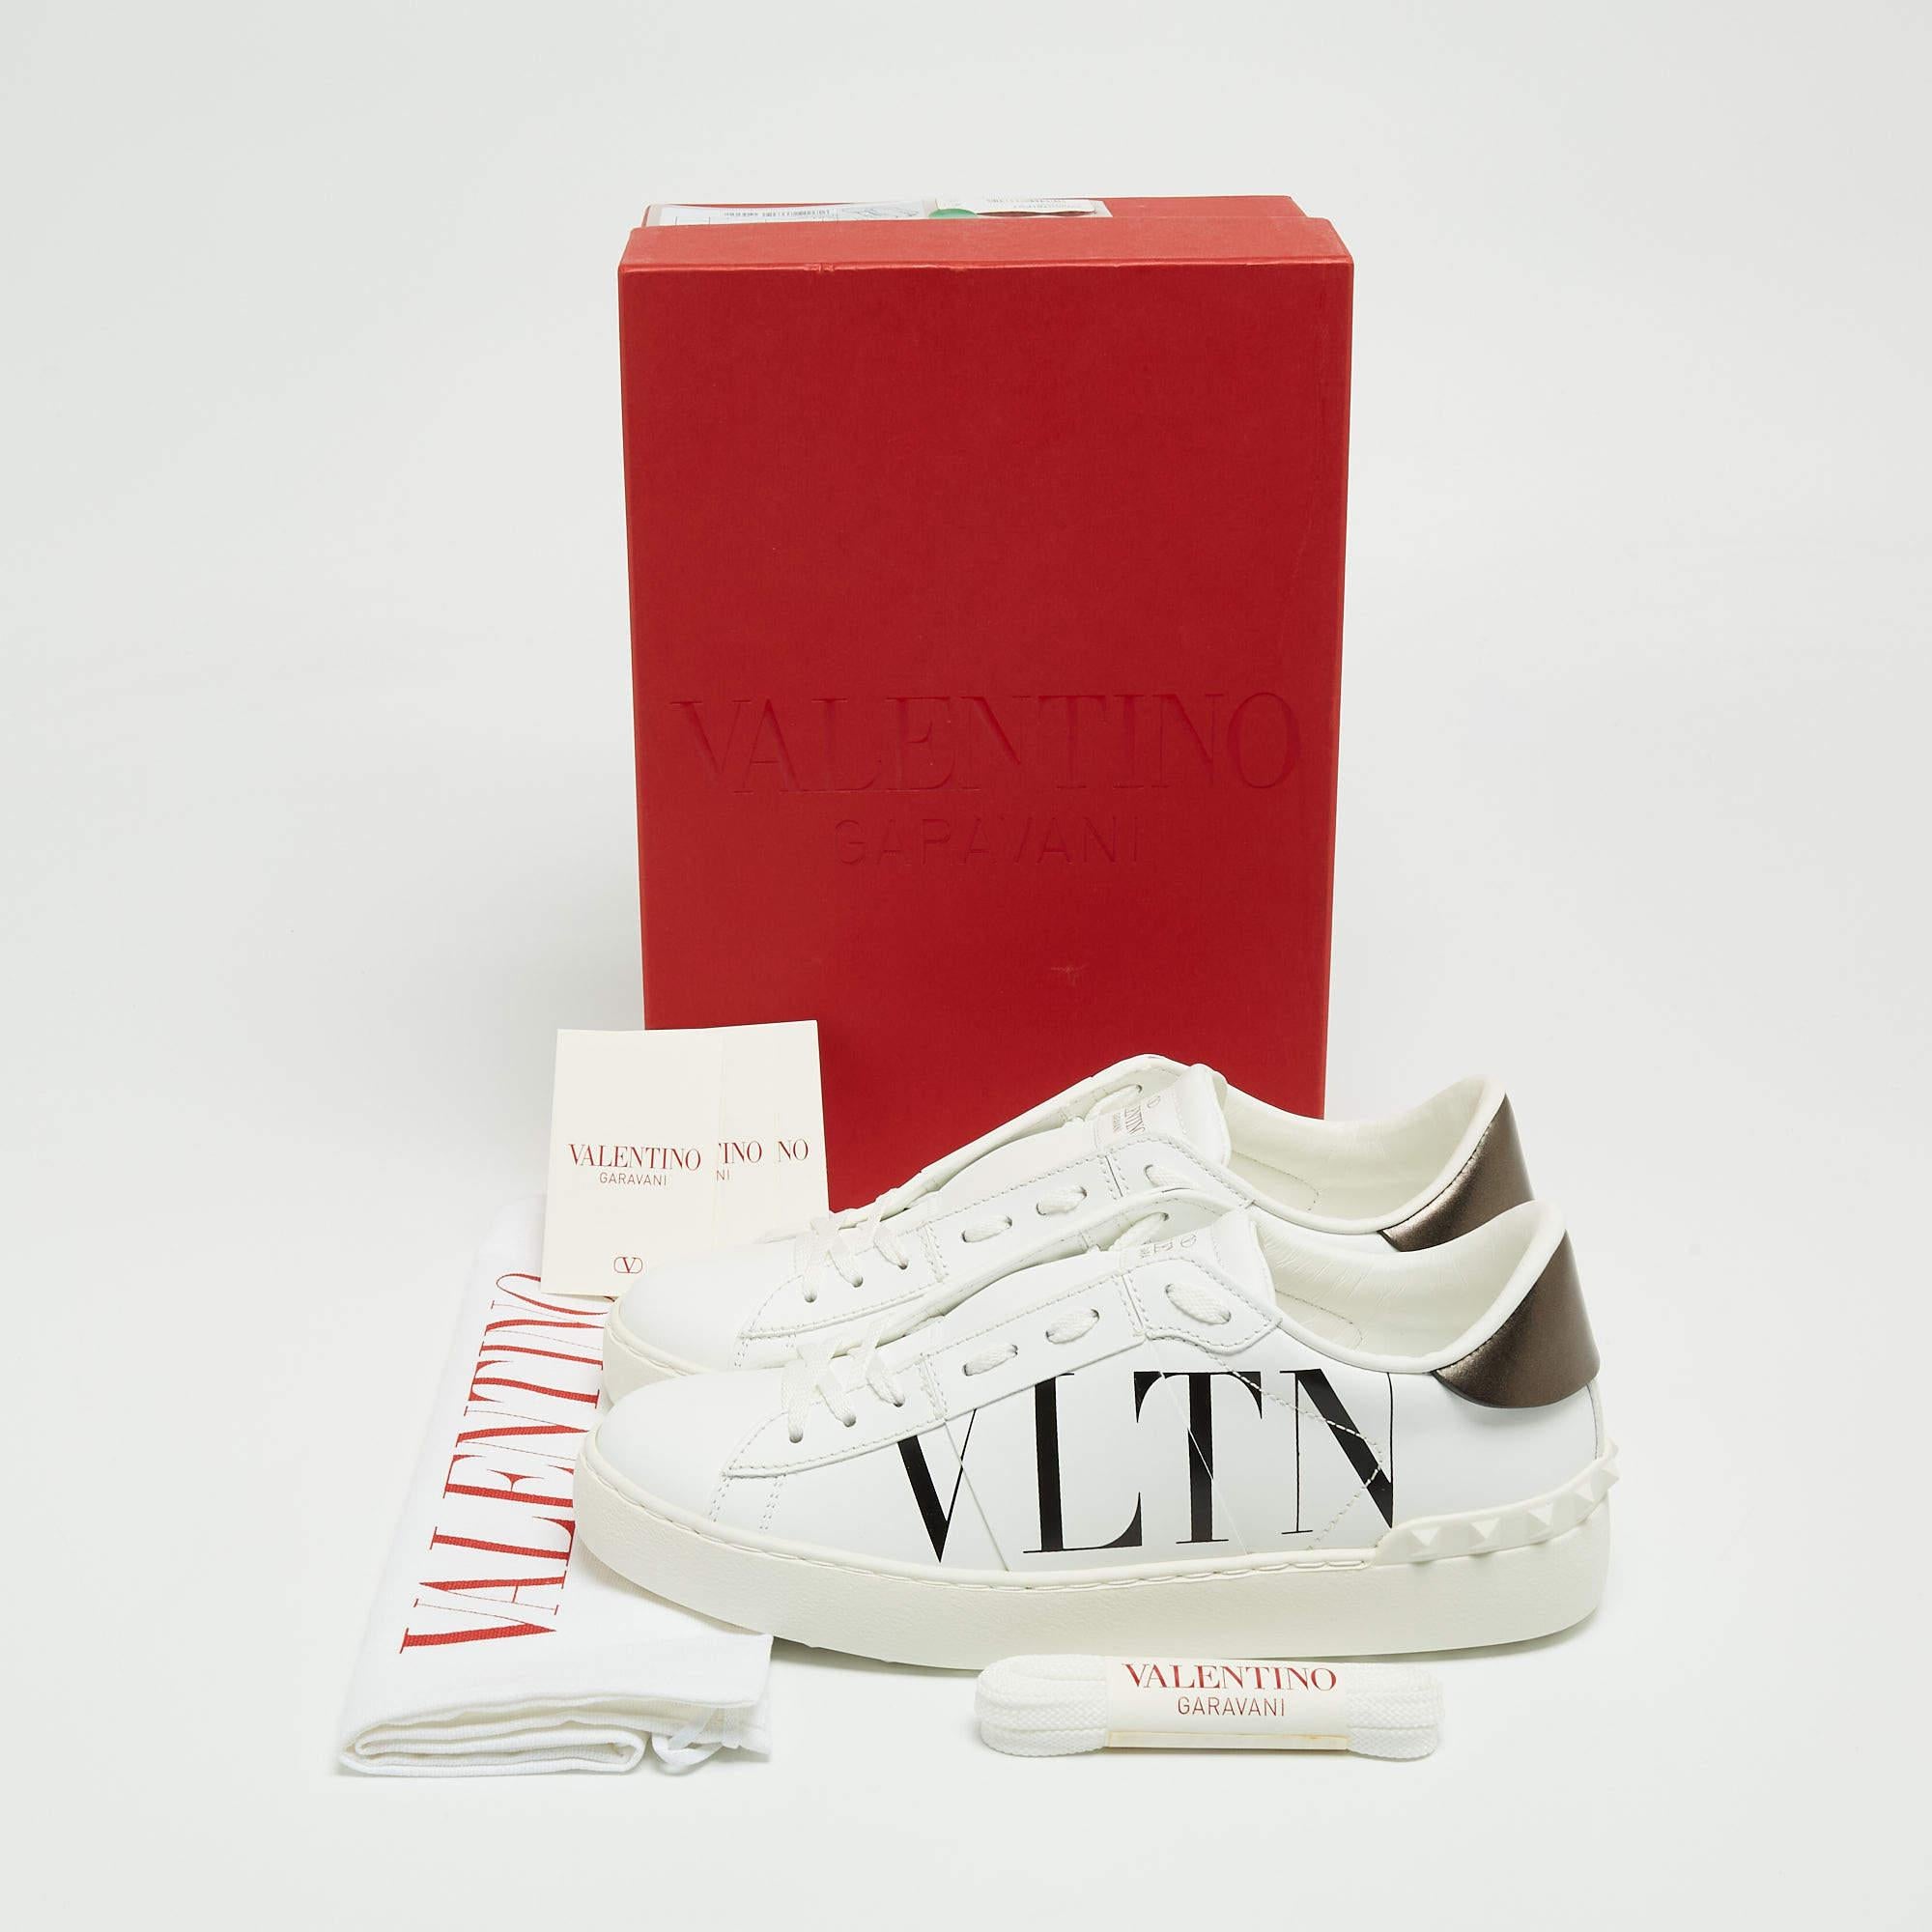 Valentino White/Grey Leather VLTN Rockstud Sneakers Size 37 4